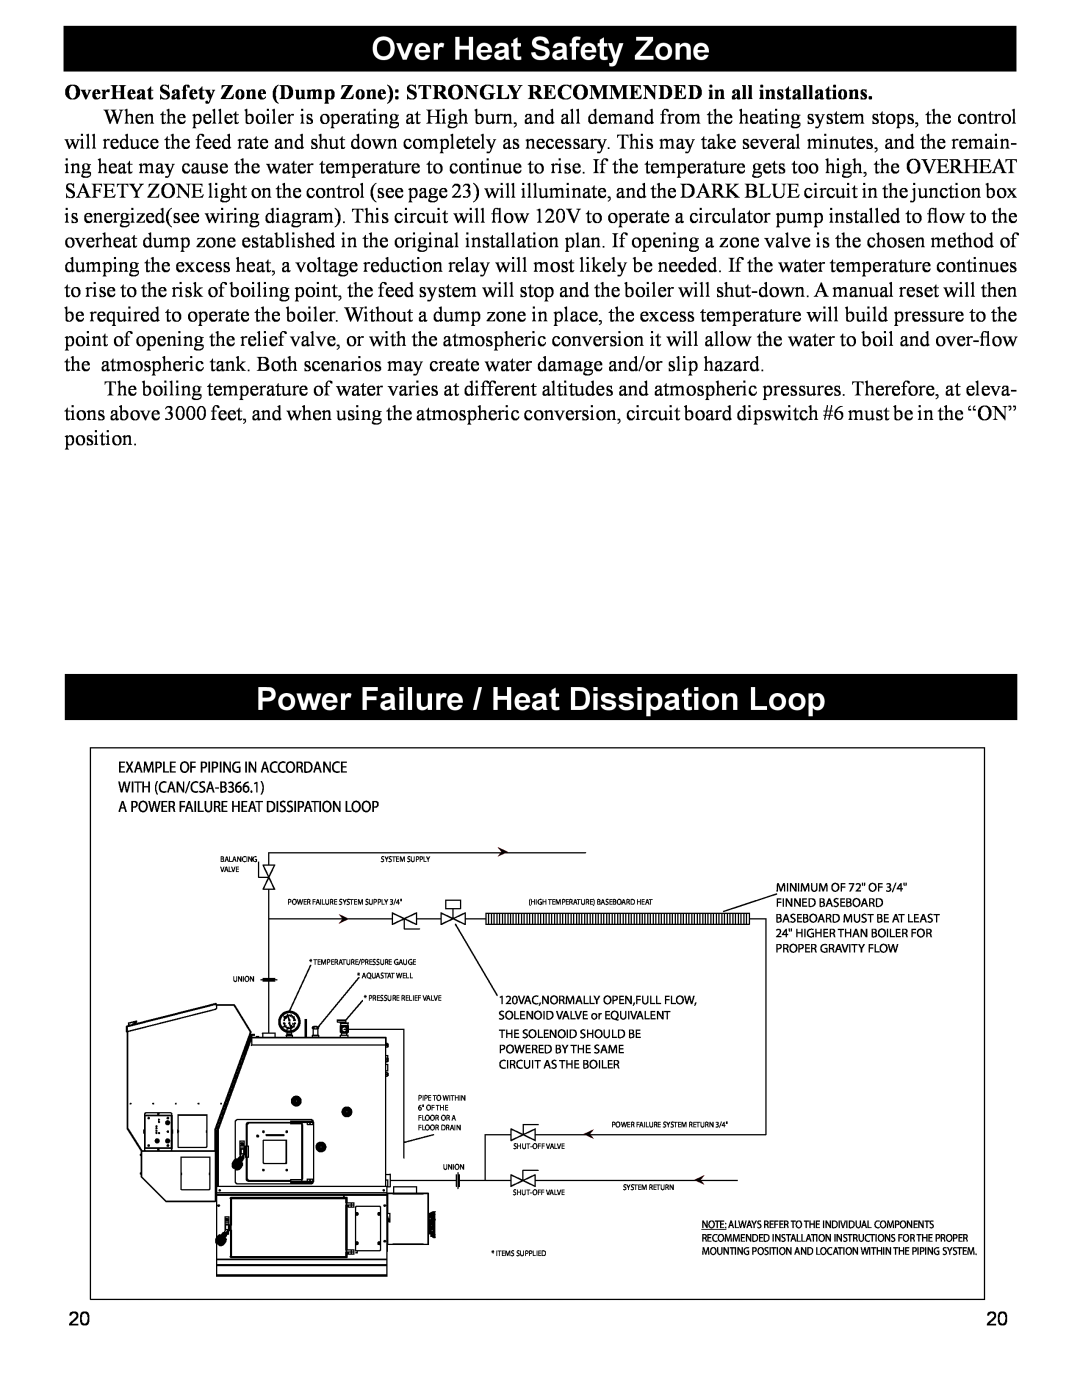 Hearth and Home Technologies BH 105 manual Over Heat Safety Zone, Power Failure / Heat Dissipation Loop 